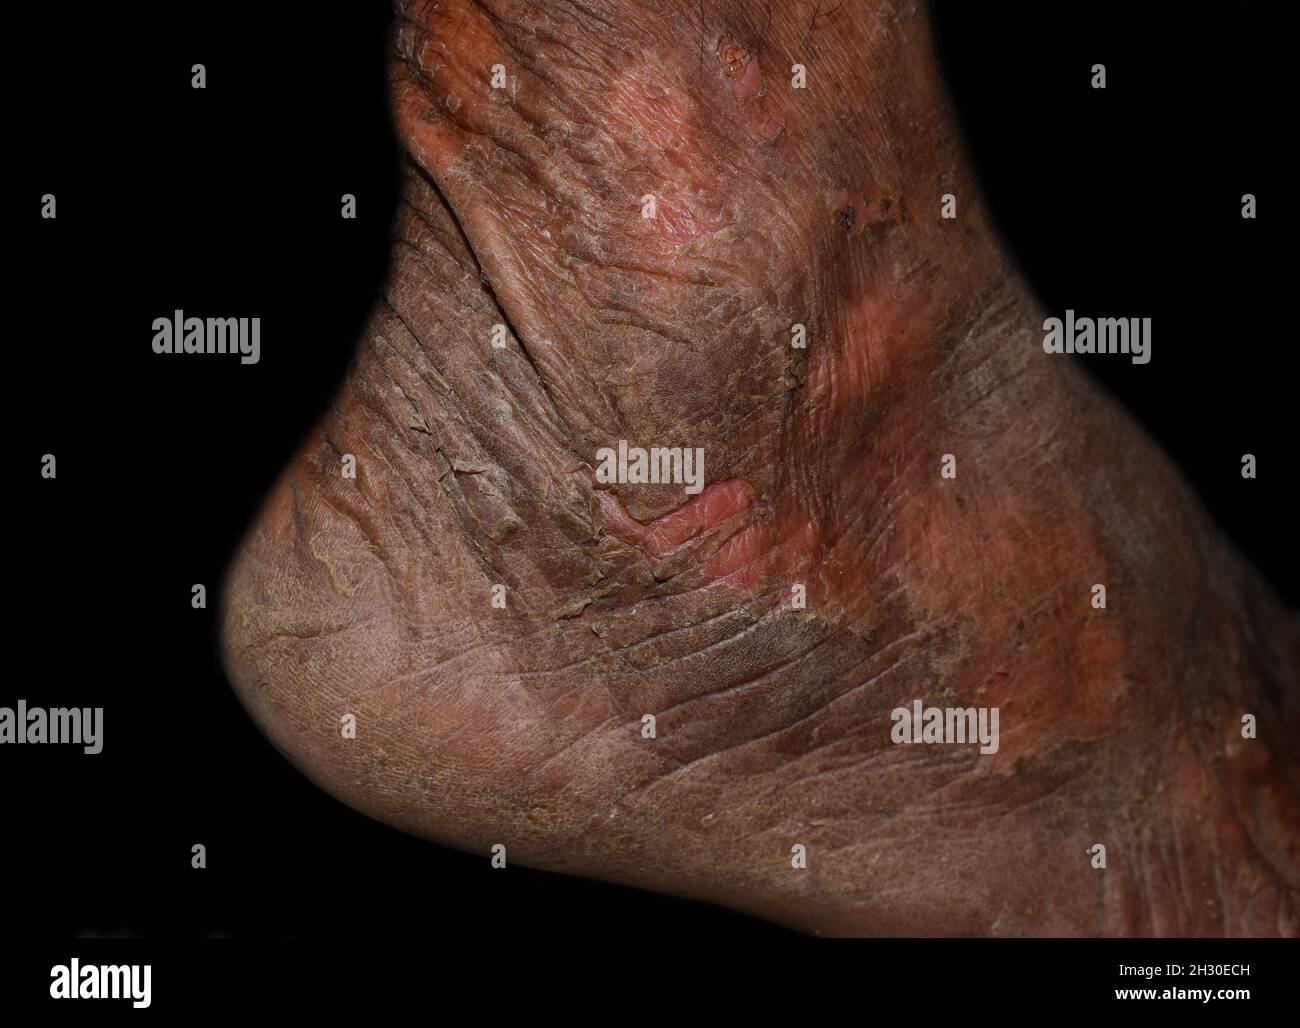 Dry and scaly skin, and abrasions in foot of Asian, Burmese man. Dermatitis foot. Stock Photo